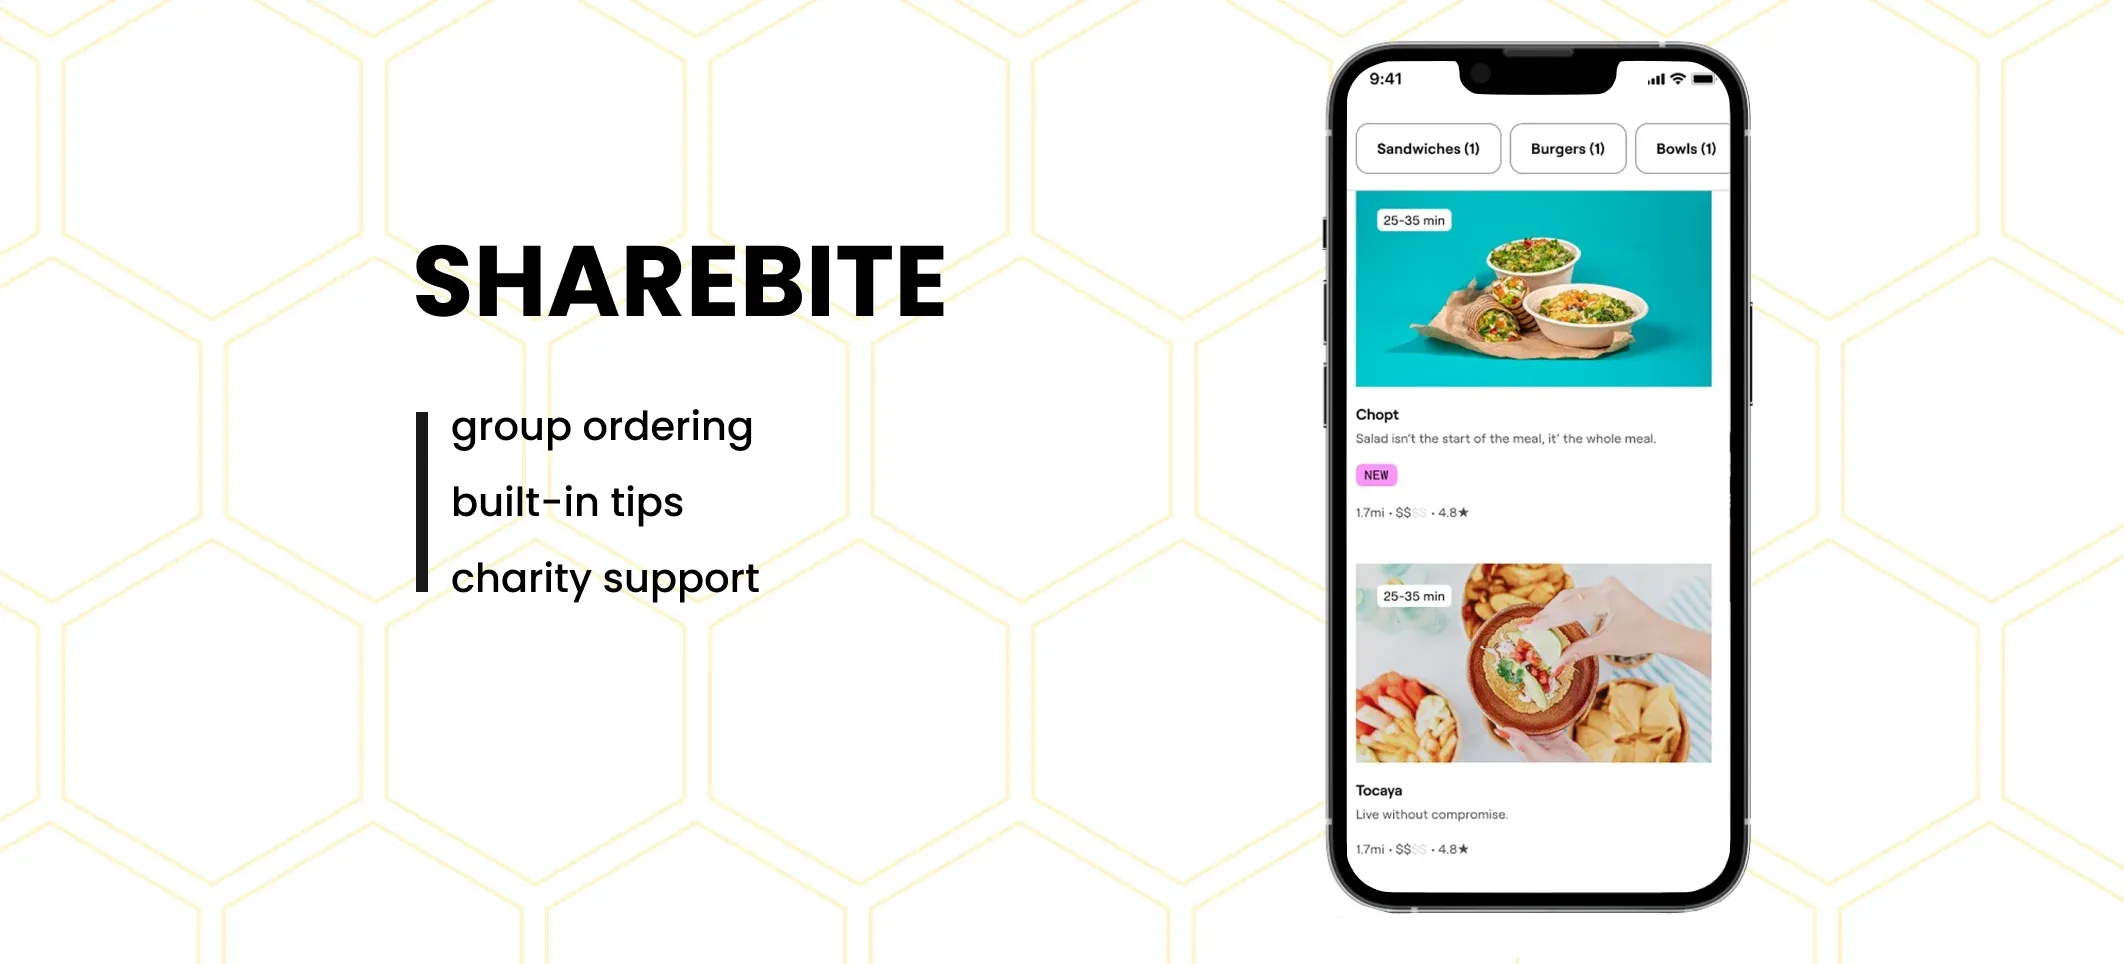 key features of sharebite app